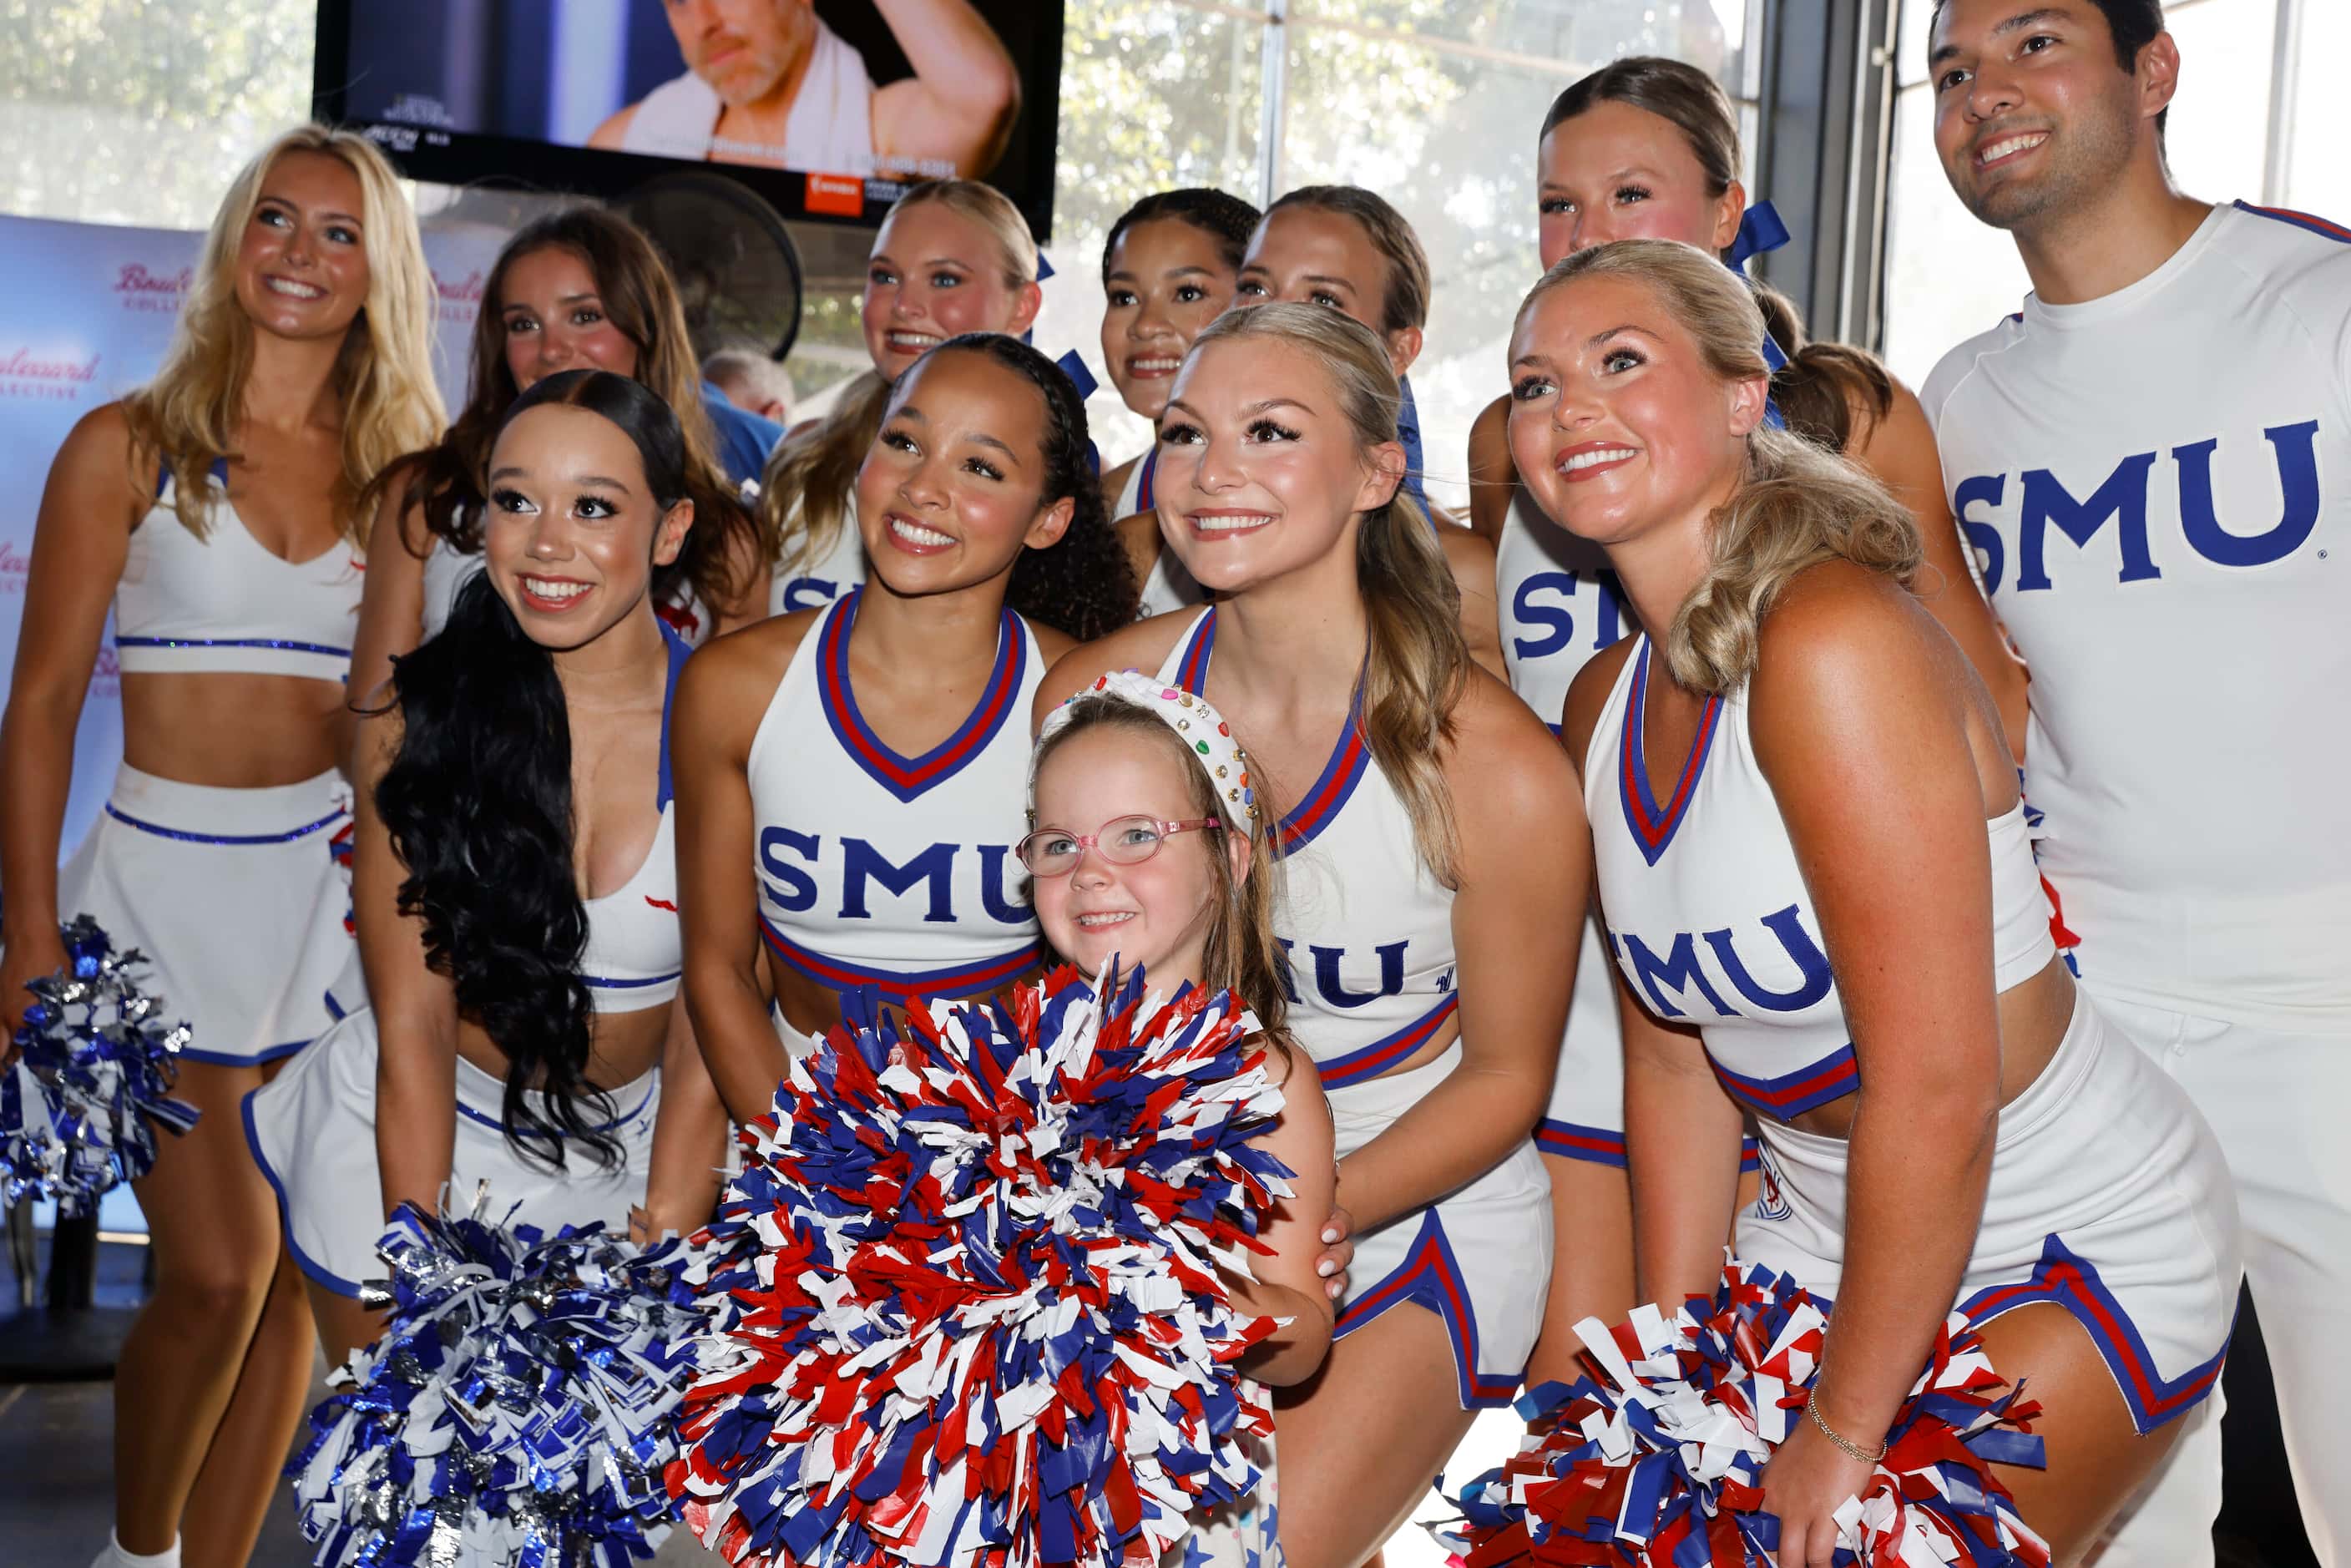 Adelaide Sherwood, 4, poses for a photo with SMU cheerleaders during a celebration of SMU’s...